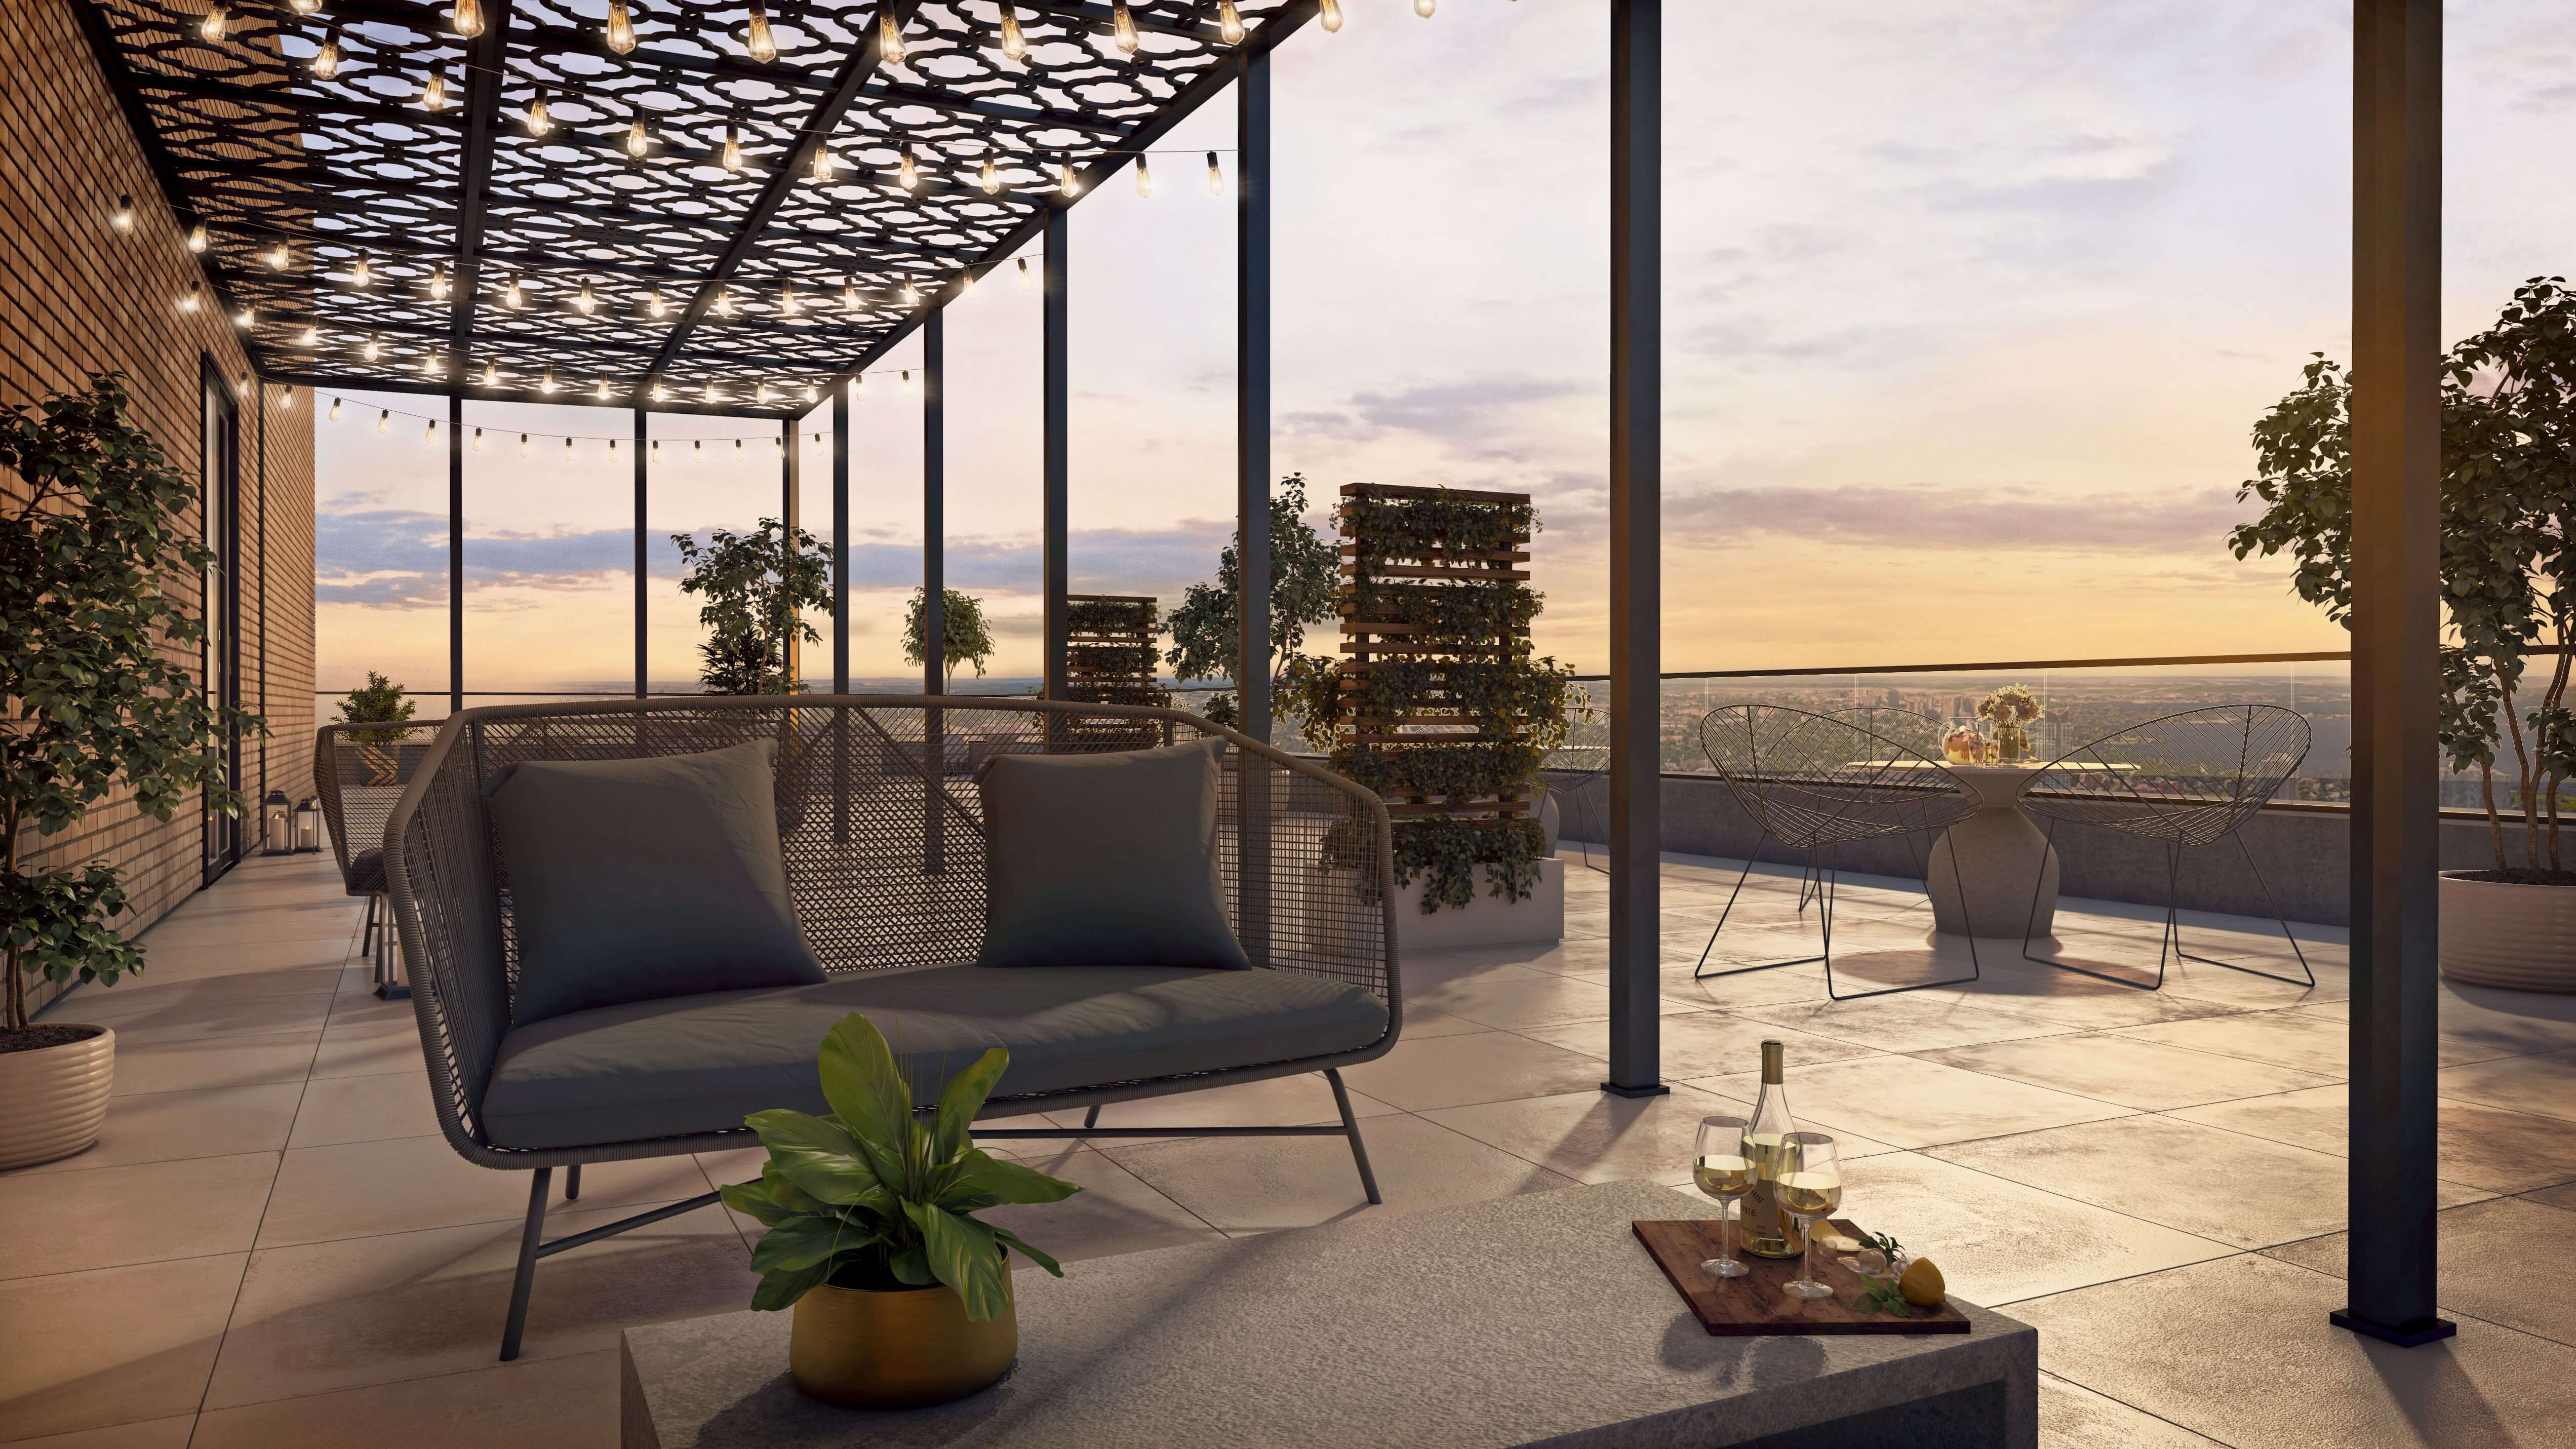 121 Parkdale--Photo Realistic Rendering of Rooftop Patio